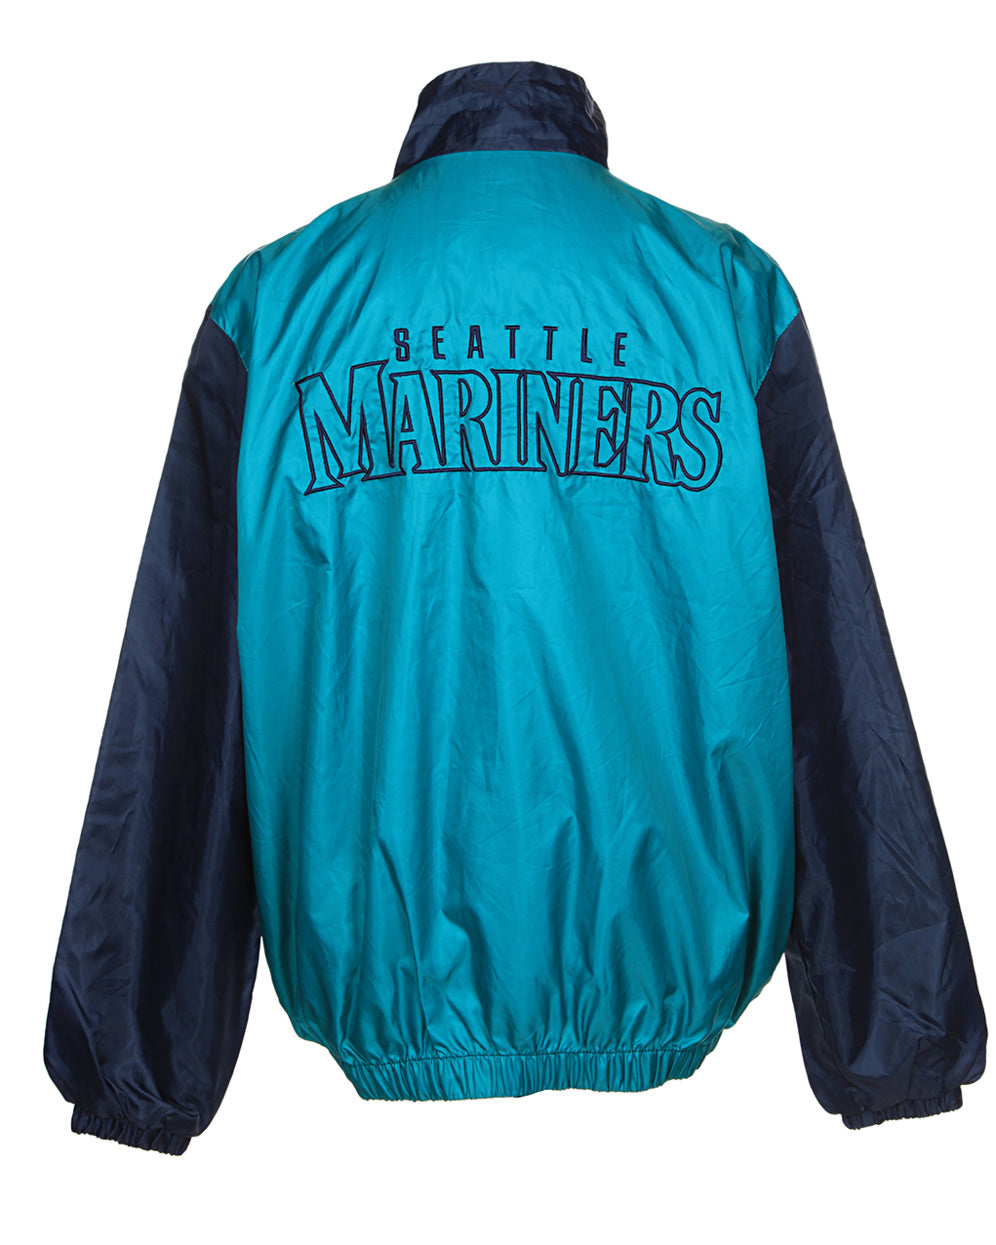 90s Seattle Mariners Navy & Blue Sports Jacket - L